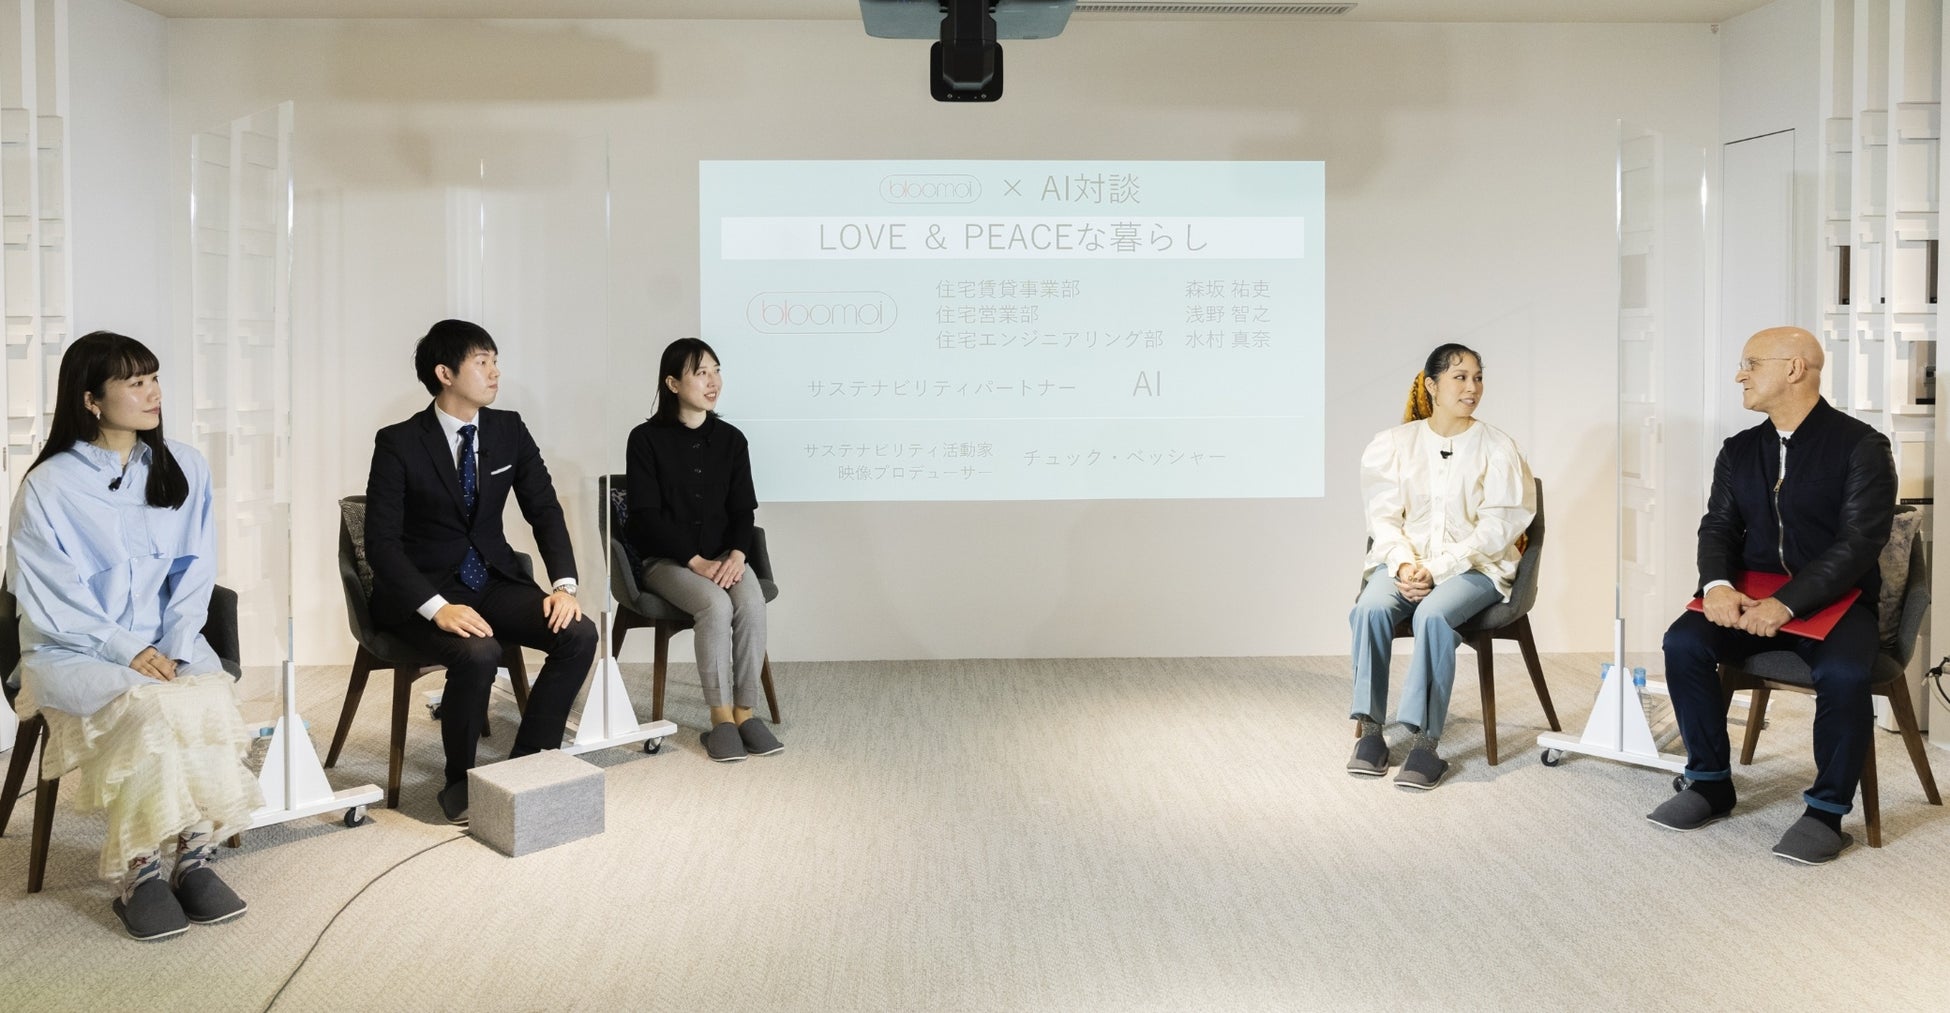 【DO for Sustainability. with 東京建物】bloomoi×AI対談「LOVE & PEACEな暮らし」を開催のサブ画像1